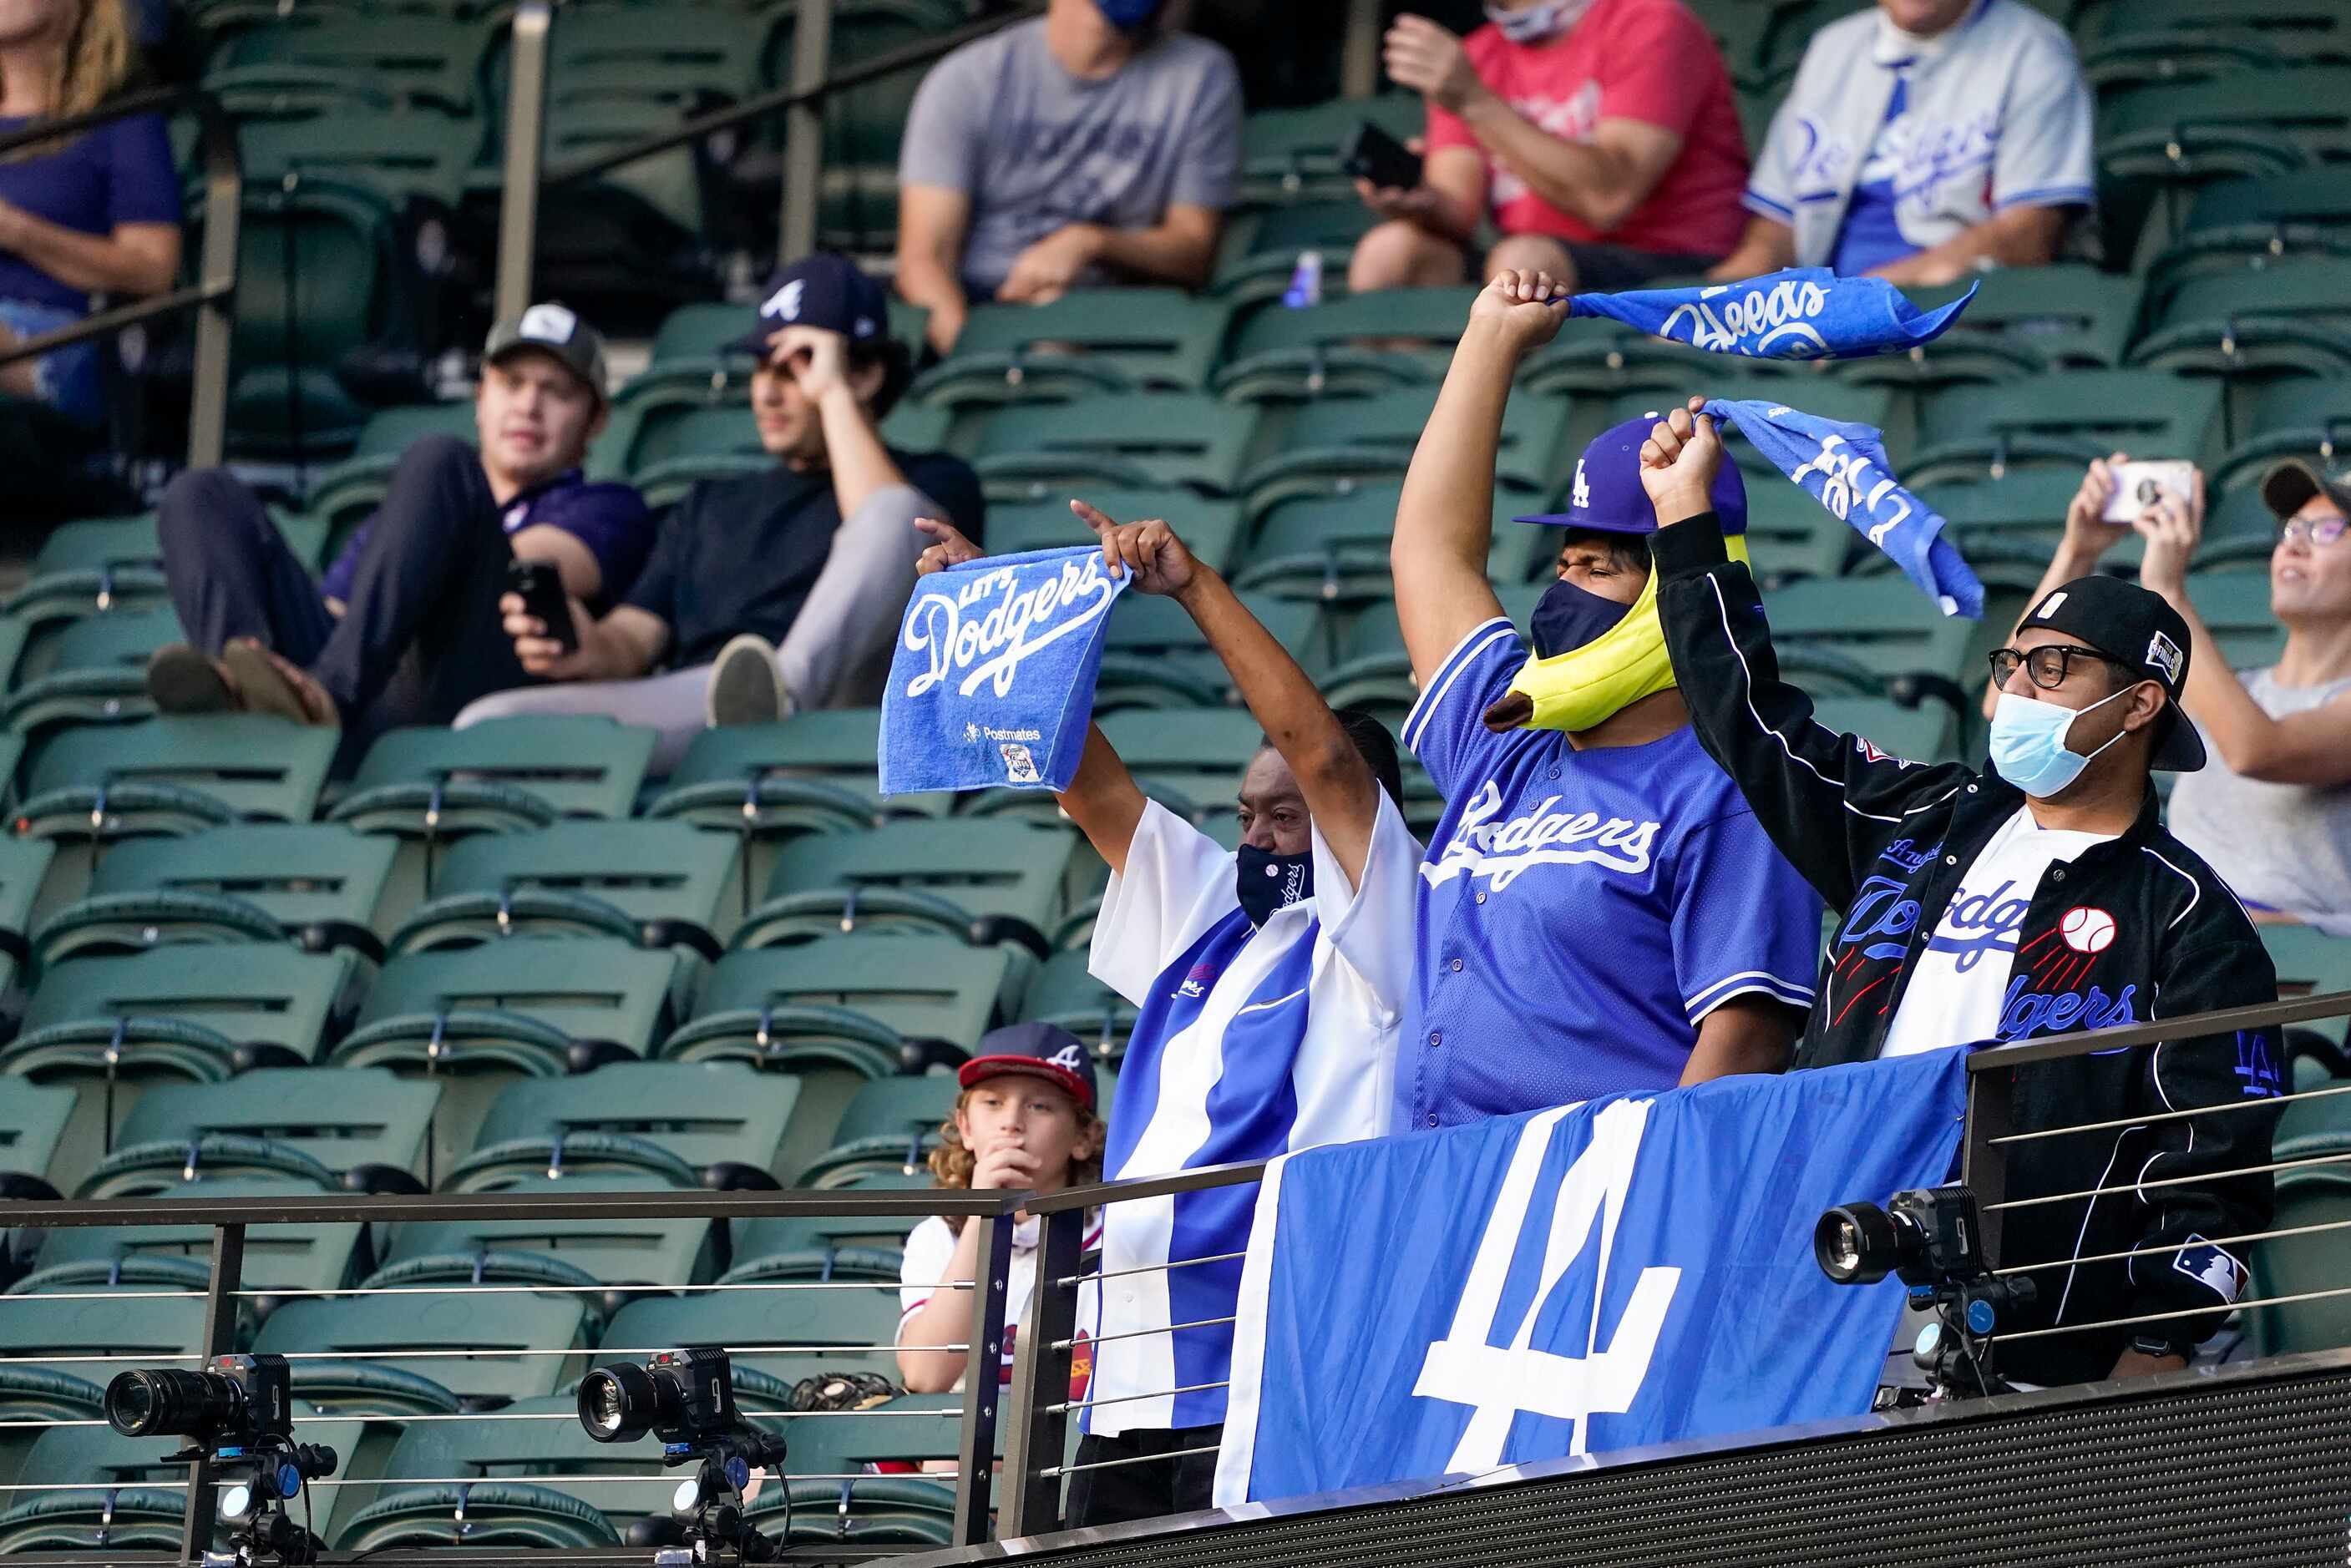 Los Angeles Dodgers fans cheer as their team takes the field to face the Atlanta Braves...